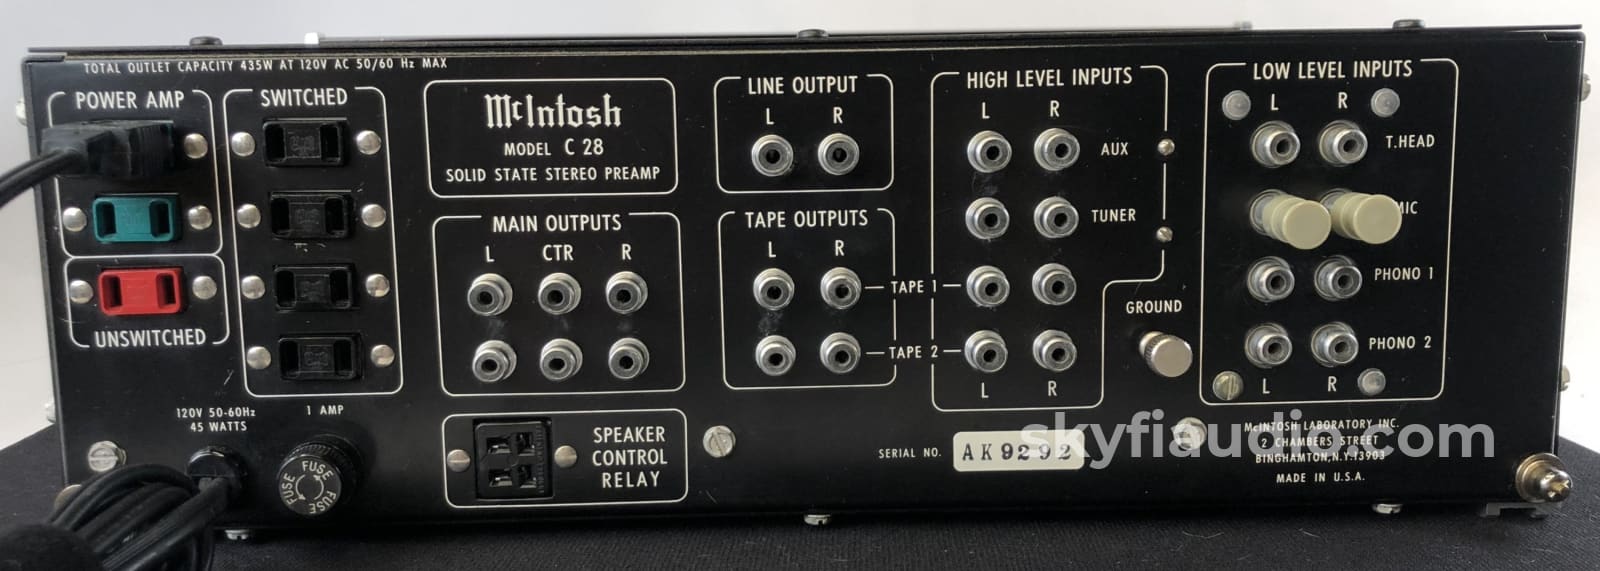 Mcintosh C28 Preamp - Fully Restored And Near Mint Preamplifier